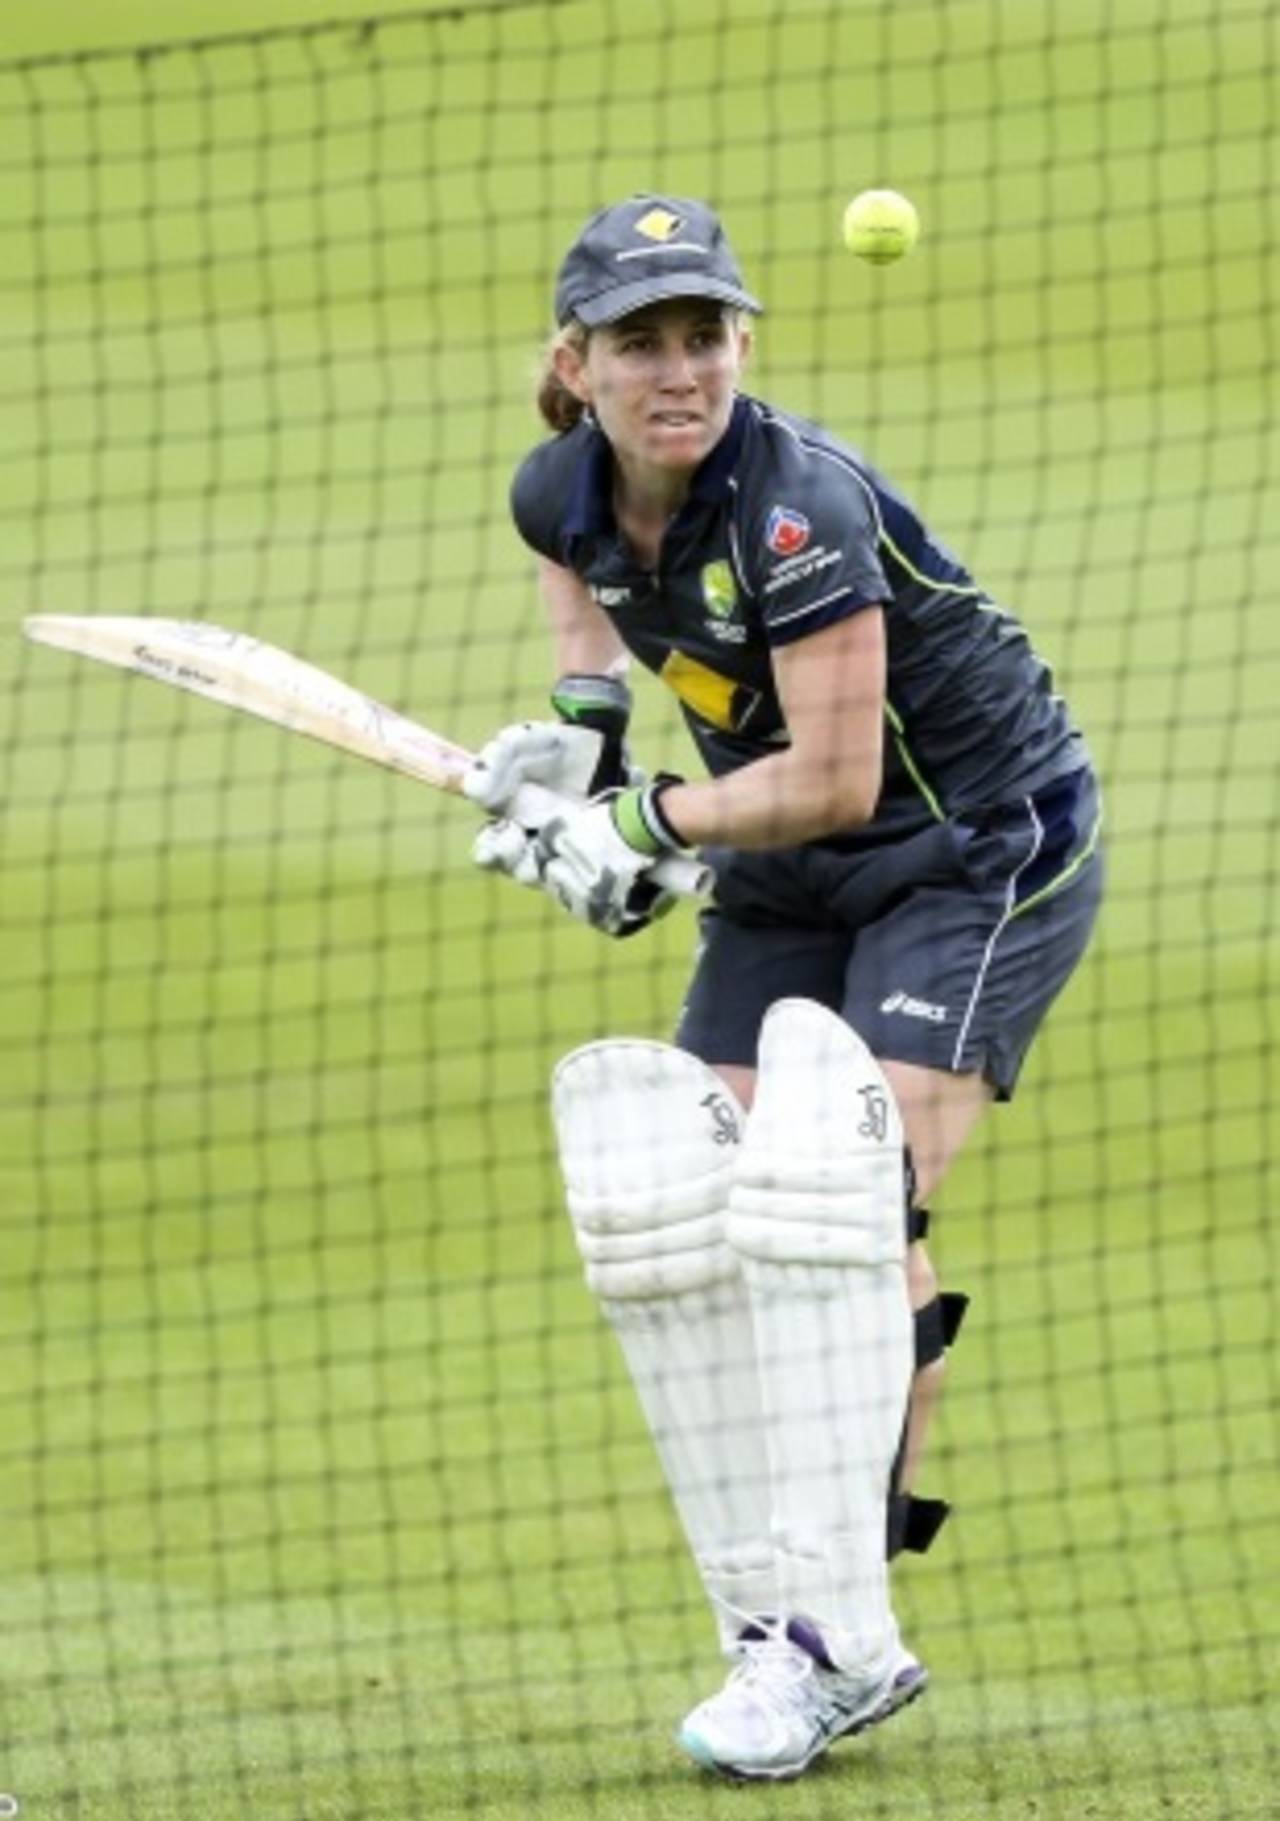 Jodie Fields bats in the nets ahead of the women's Ashes, Australia Women tour of England, Wormsley, August 9, 2013